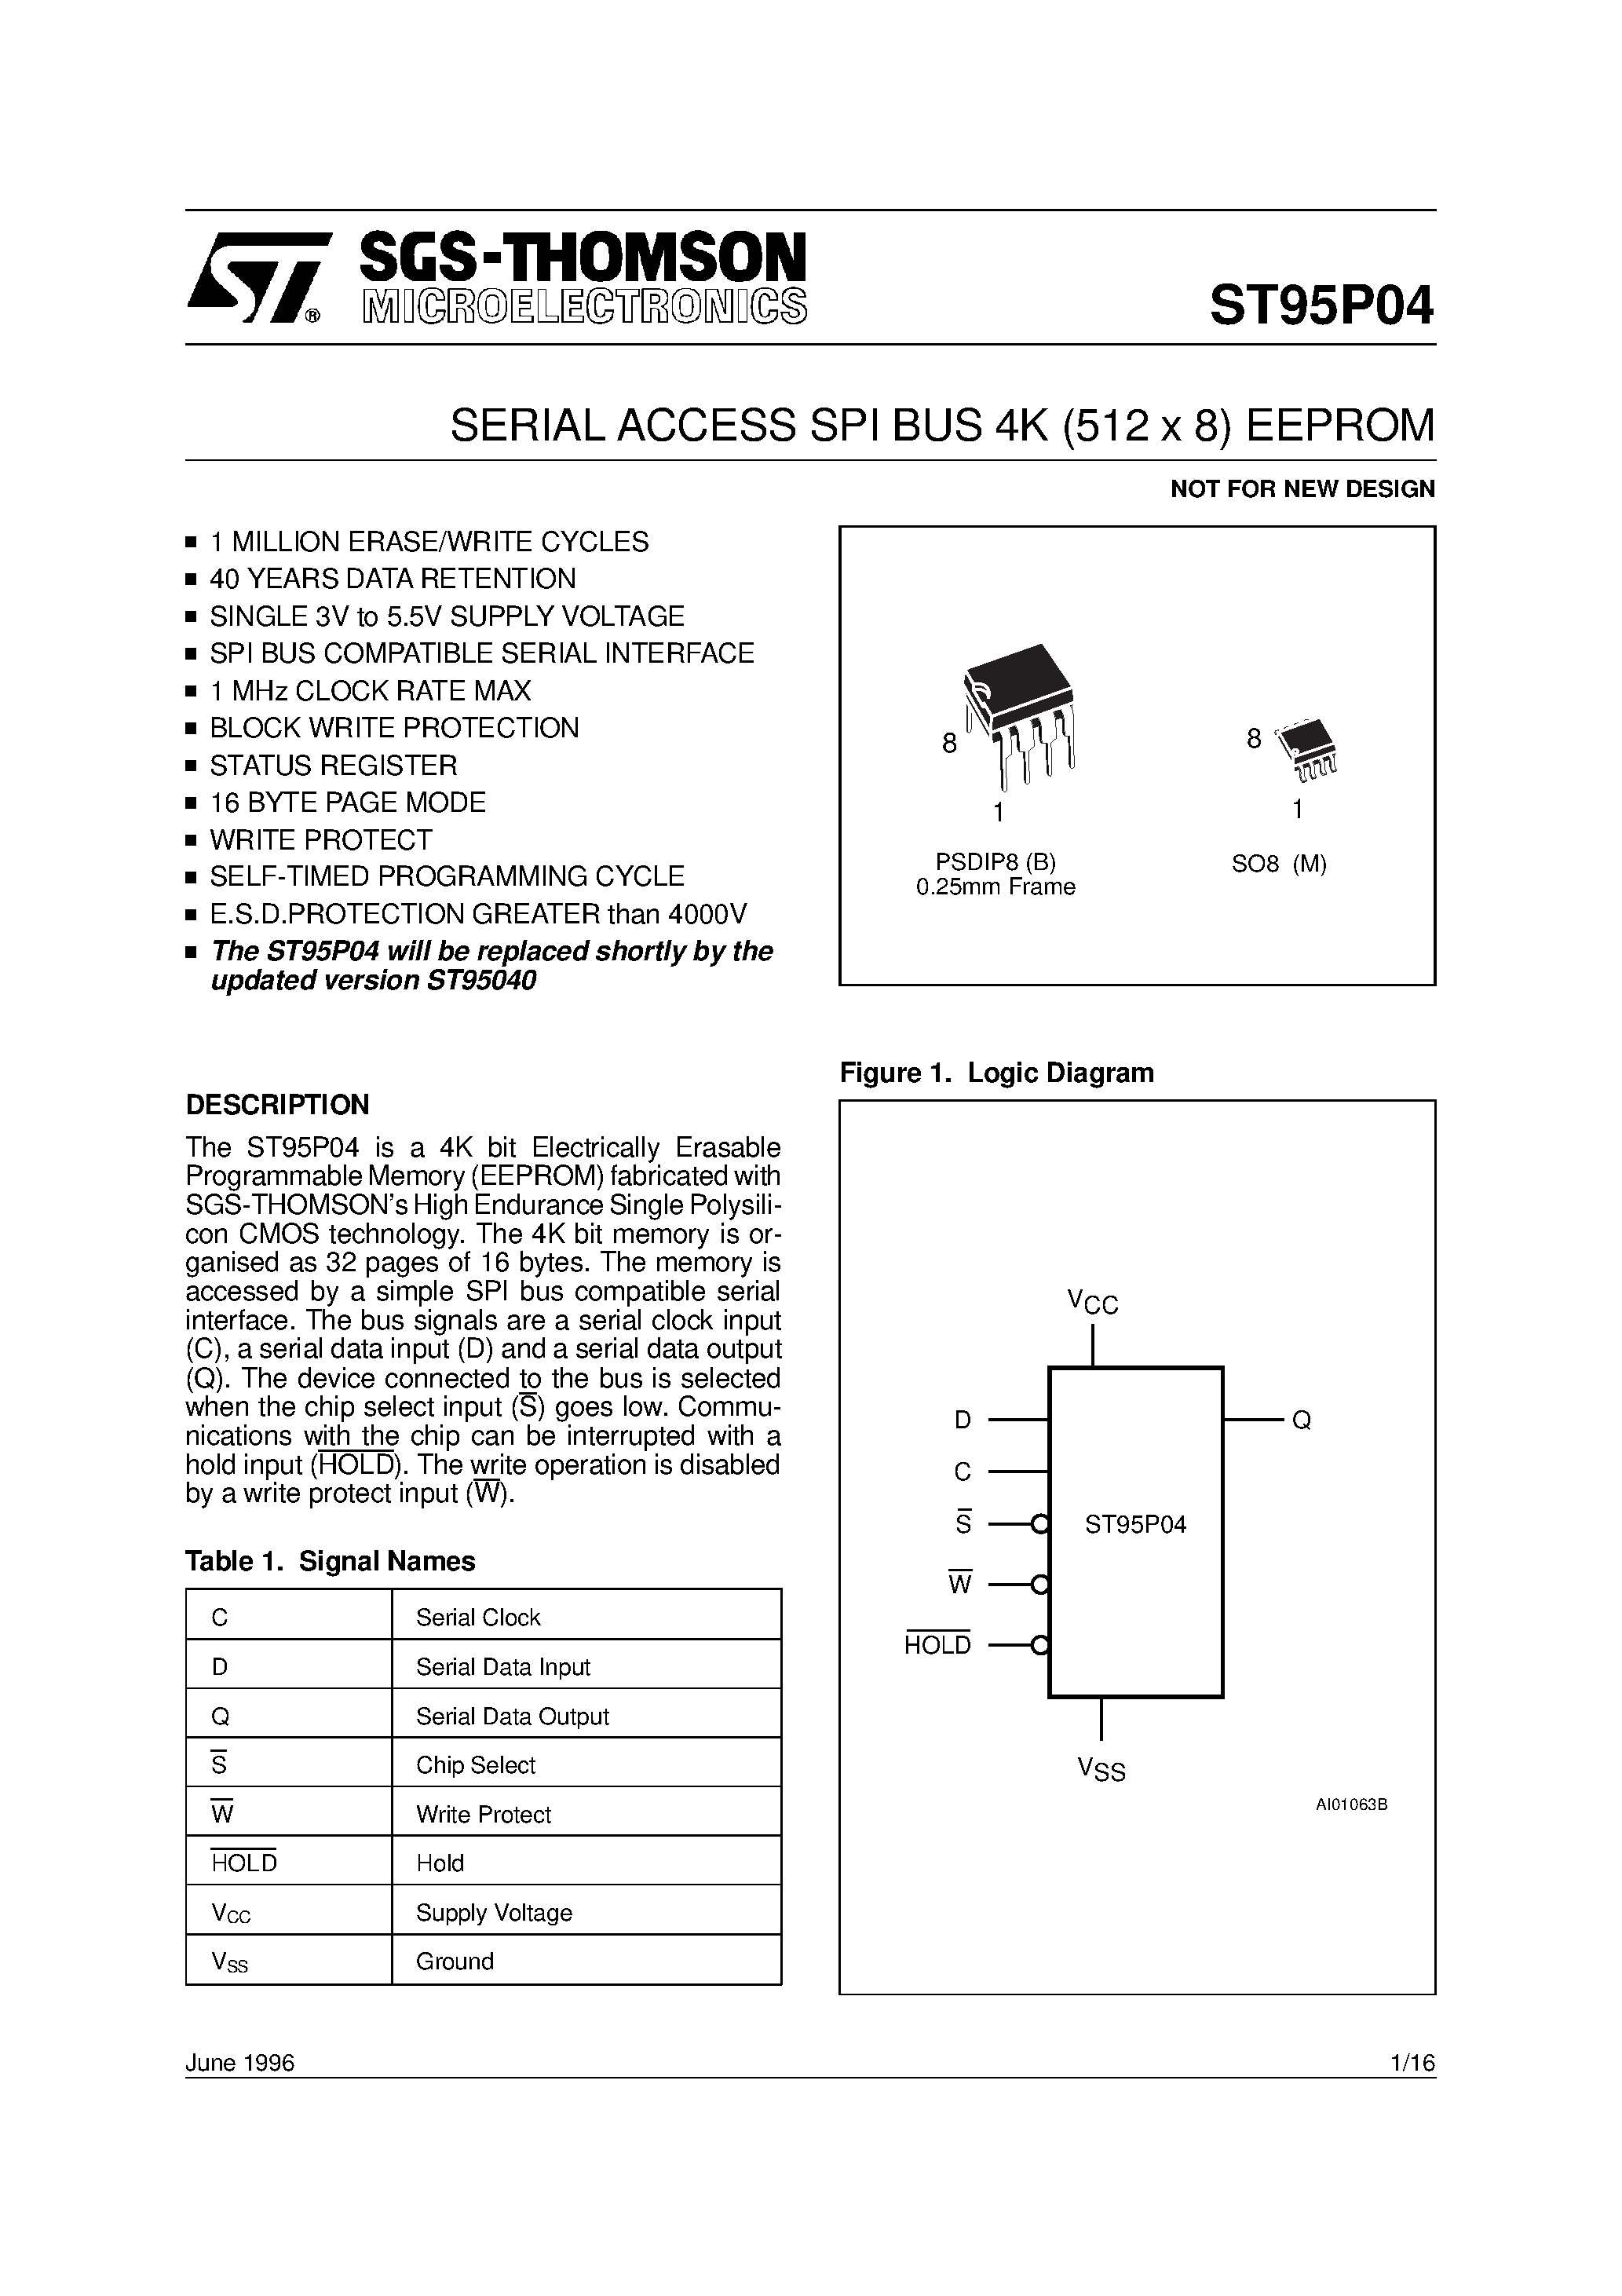 Datasheet ST95P04 - SERIAL ACCESS SPI BUS 4K 512 x 8 EEPROM page 1